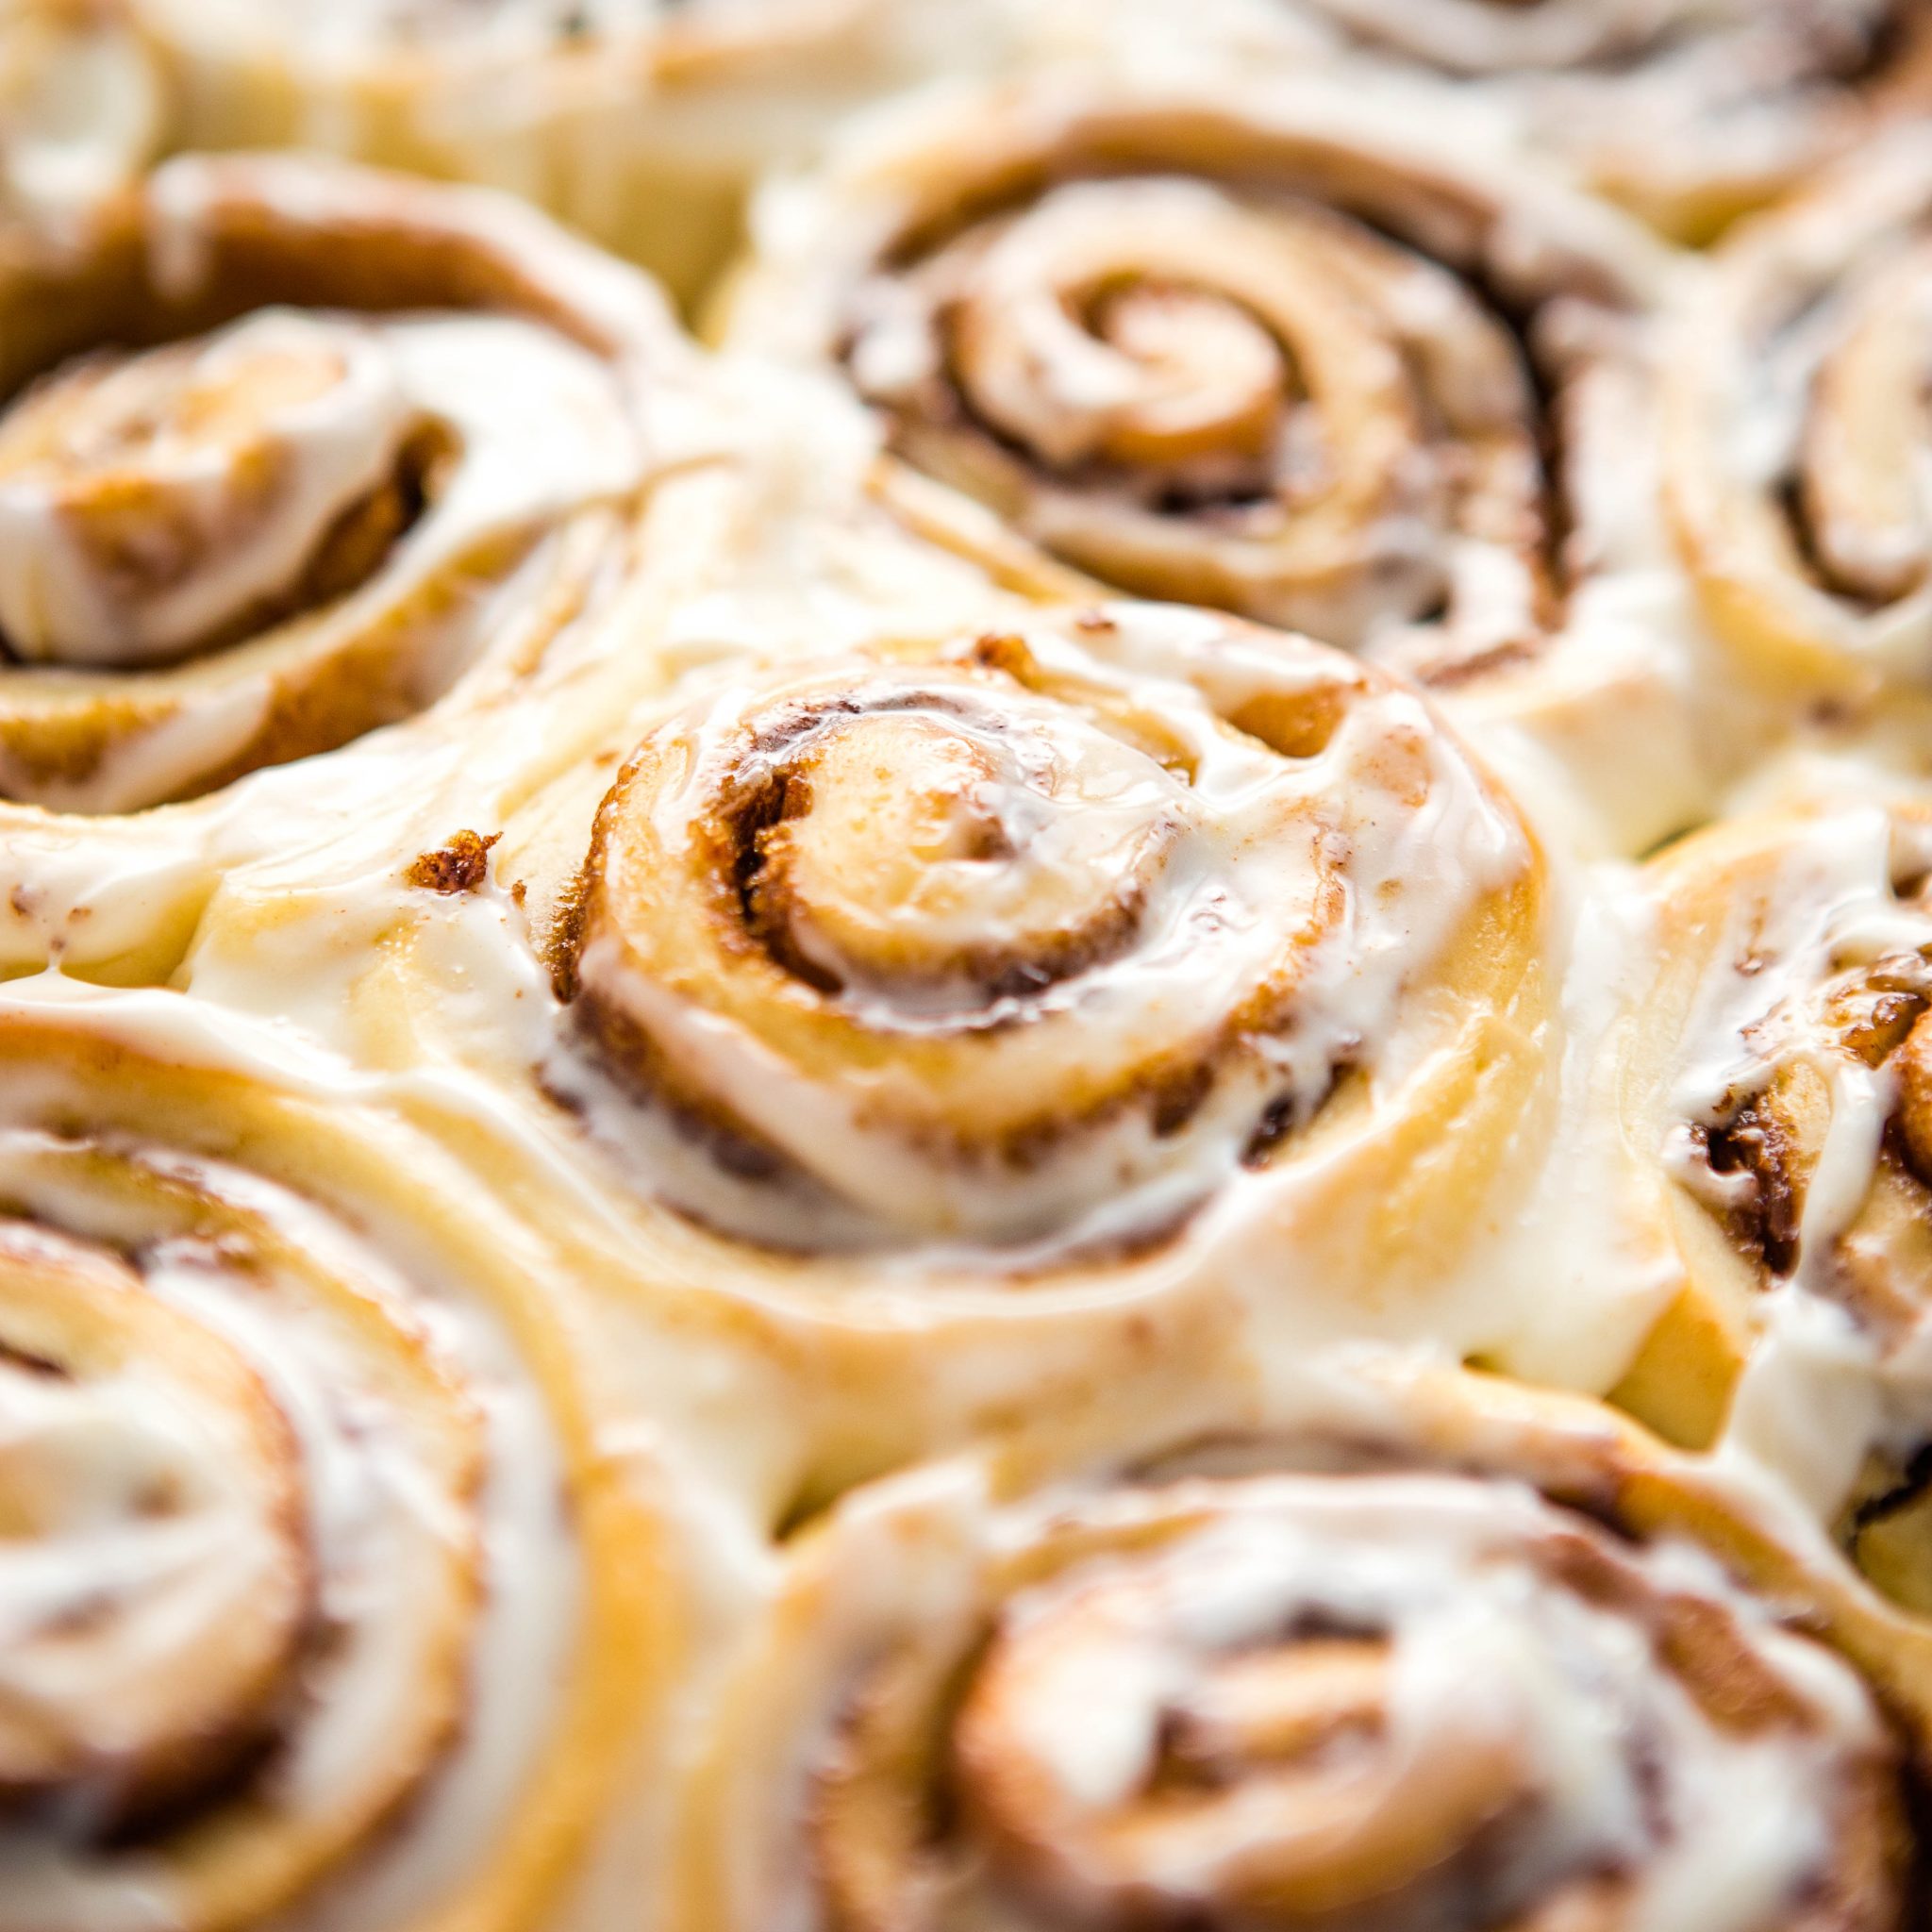 cinnamon rolls recipe step by step pictures